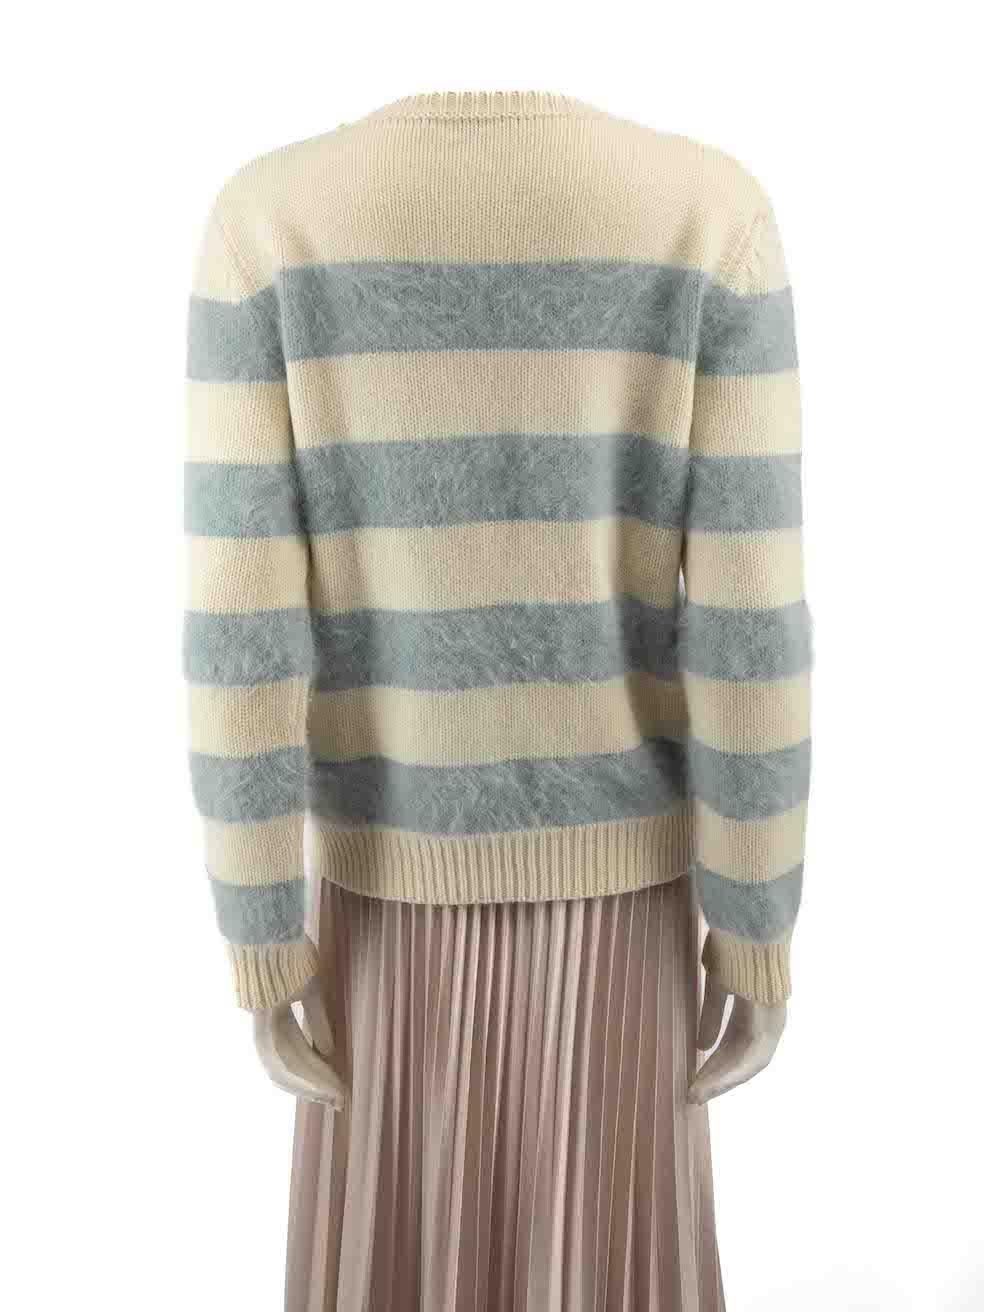 Gucci Beige & Blue Wool Striped Knit Jumper Size M In Good Condition For Sale In London, GB